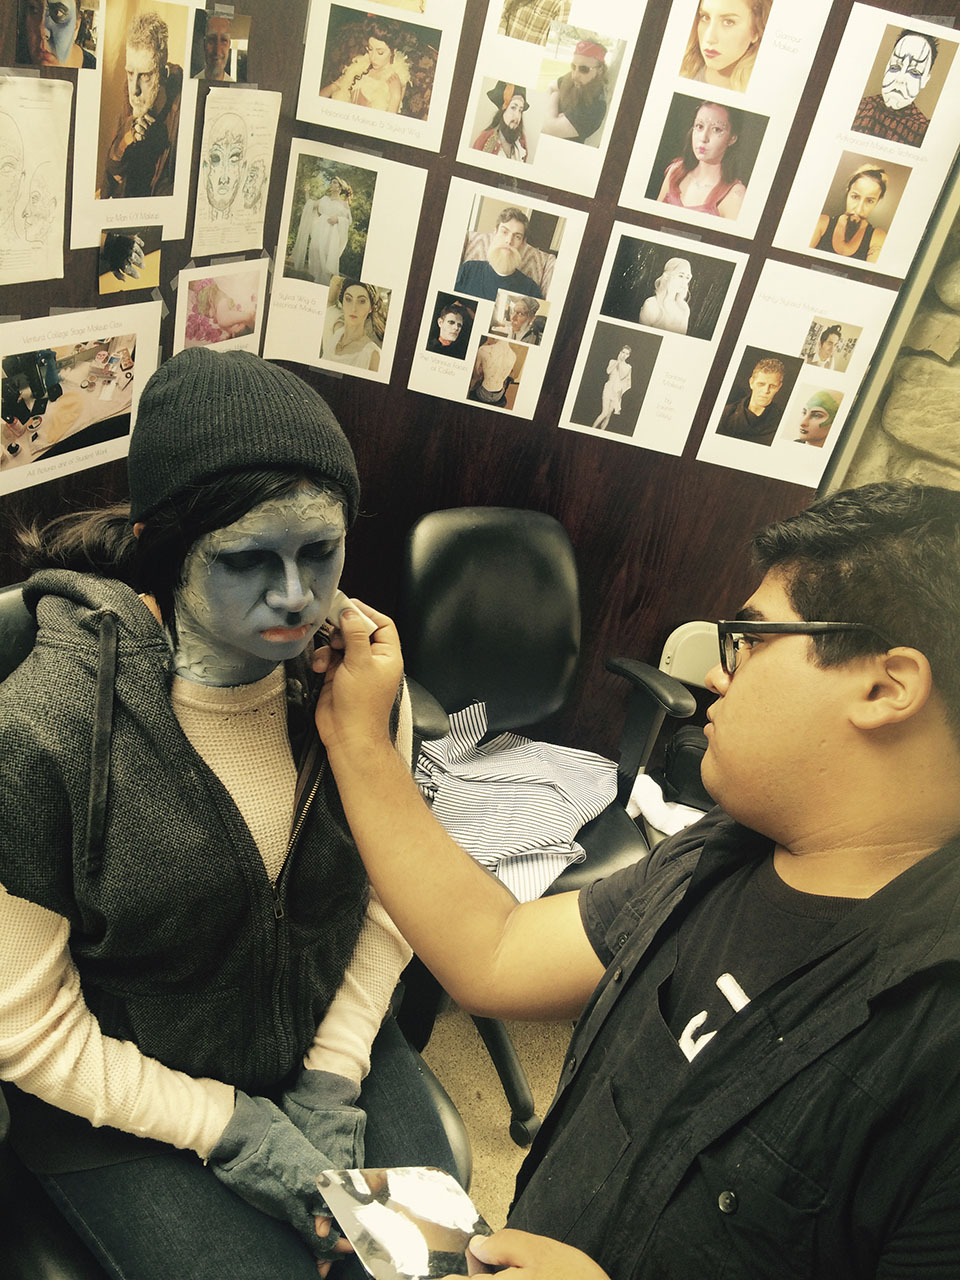 A male student with dark hair applies a monster gray character makeup to a student wearing a black beanie. Makeup images can be seen on the wall behind them.